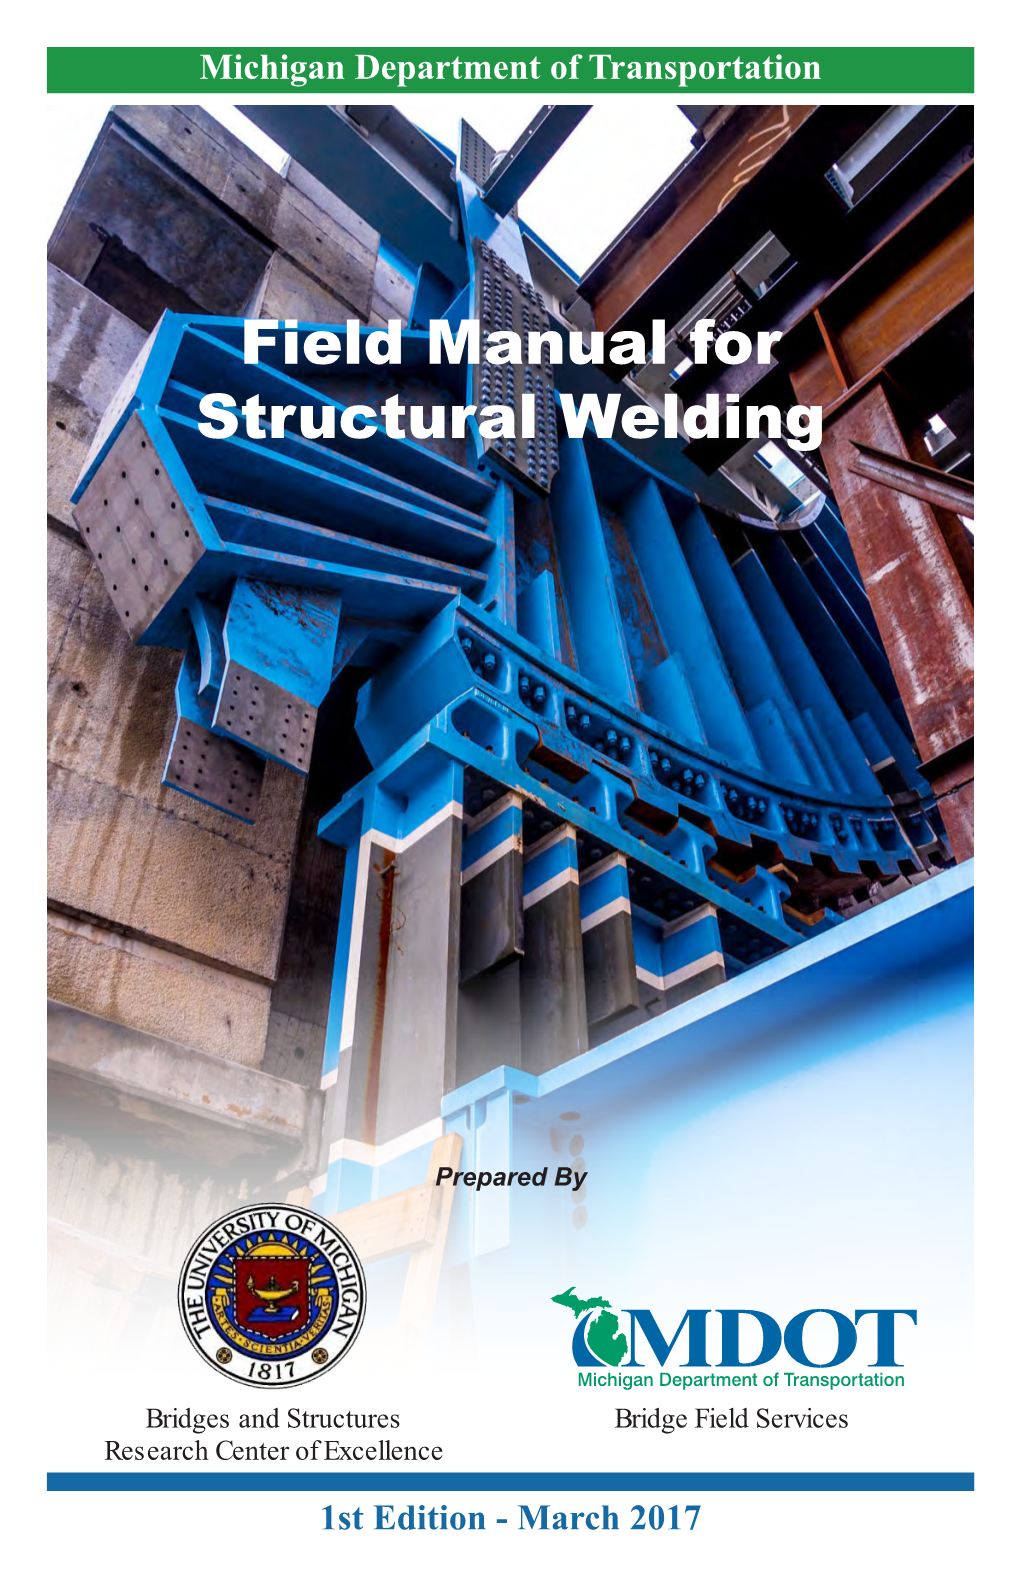 Field Manual for Structural Welding